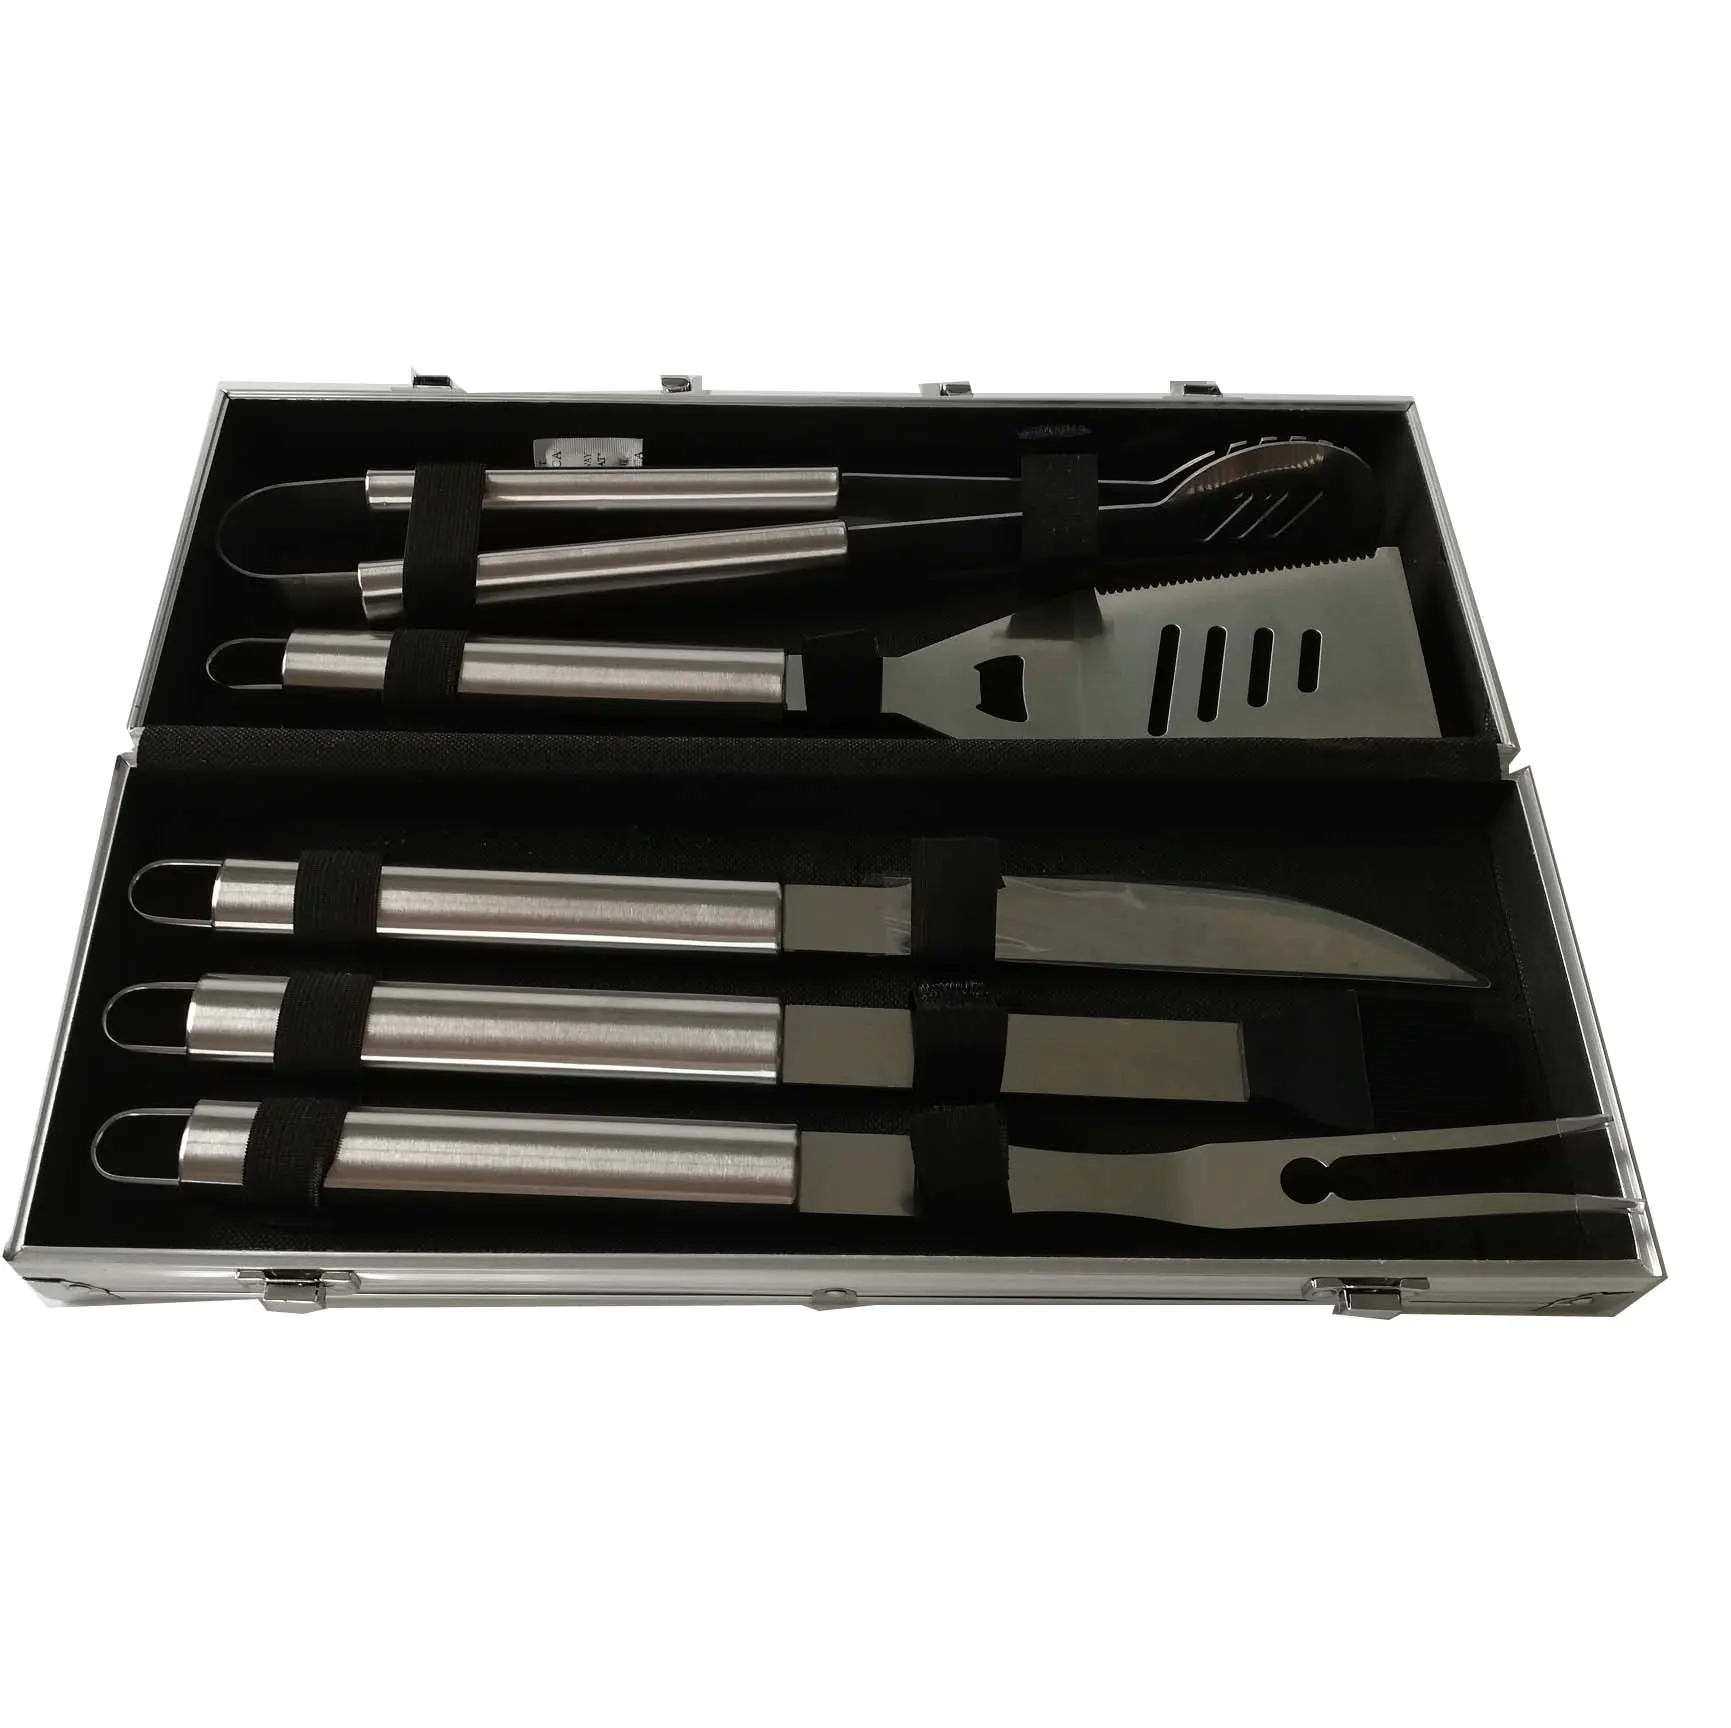 5pcs stainless steel bbq tools set for barbecue with aluminum case